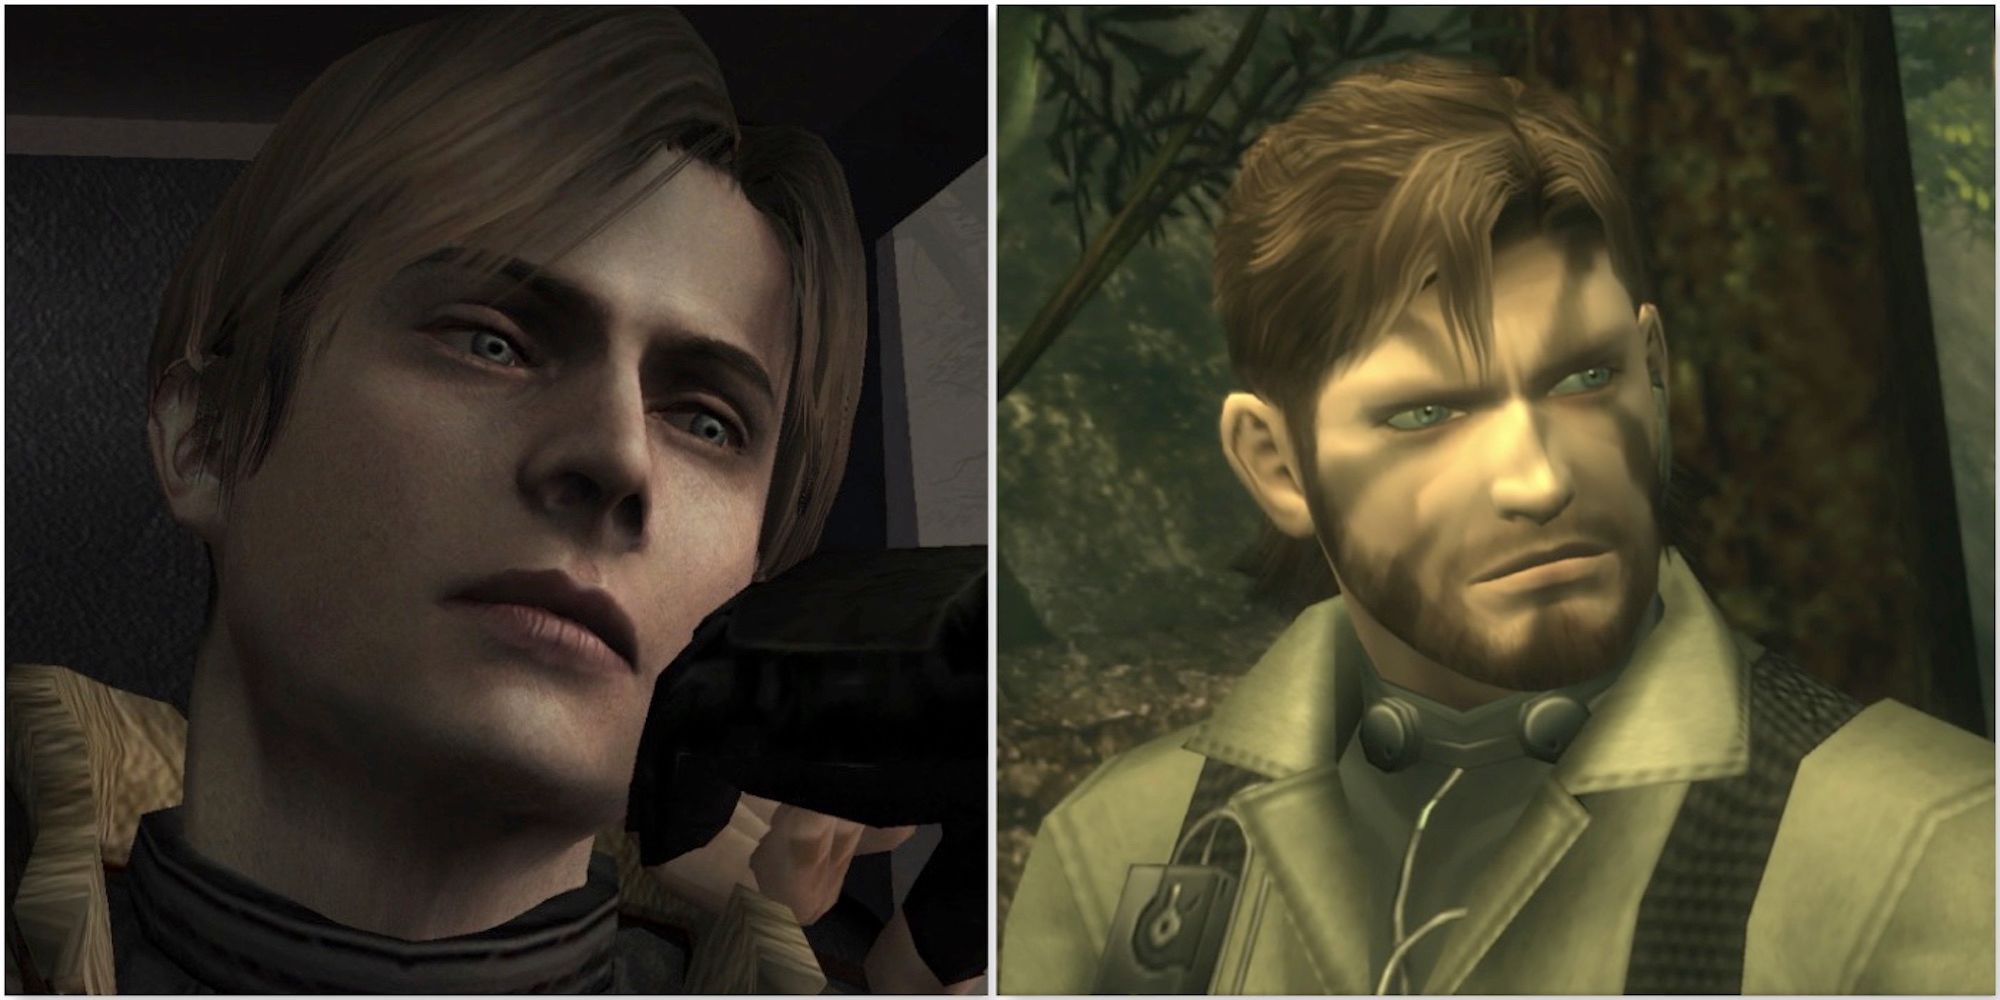 Leon from Resident Evil 4 and Snake from Metal Gear Solid 3 Snake Eater